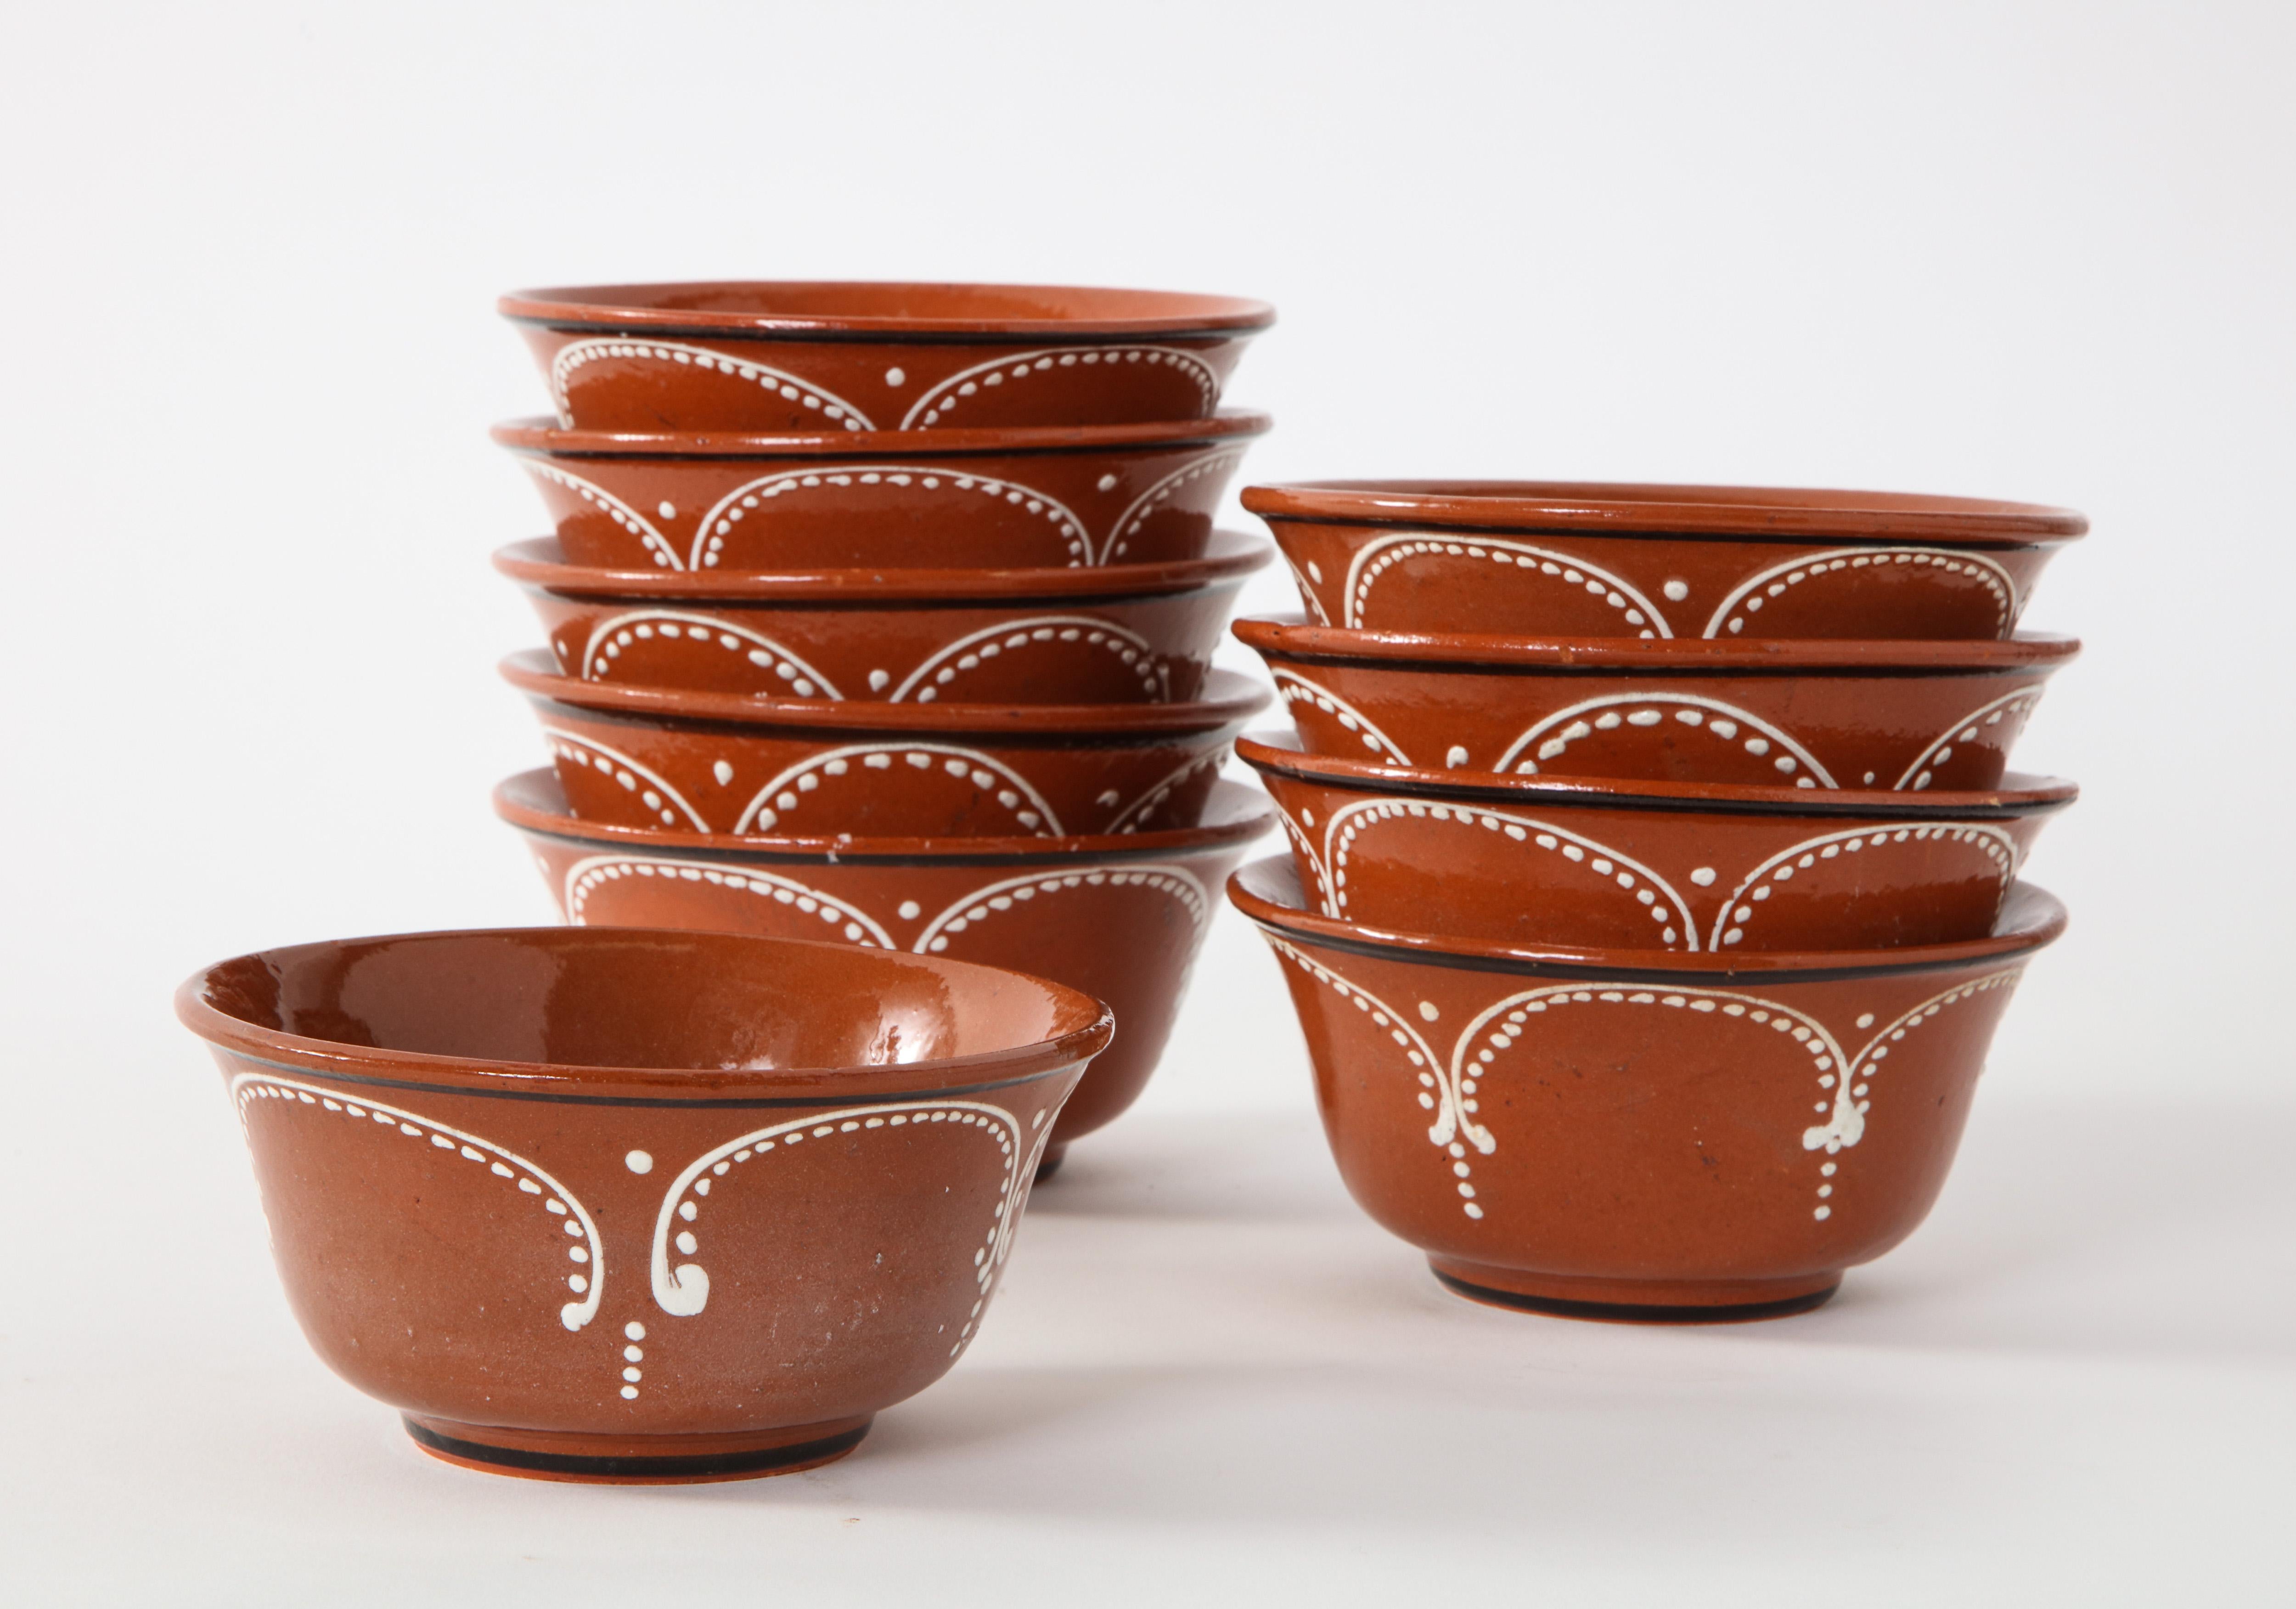 Set of 10 Mexican Tlaquepaque terracotta bowls, hand glazed, circa 1950. Food safe, hand wash only.